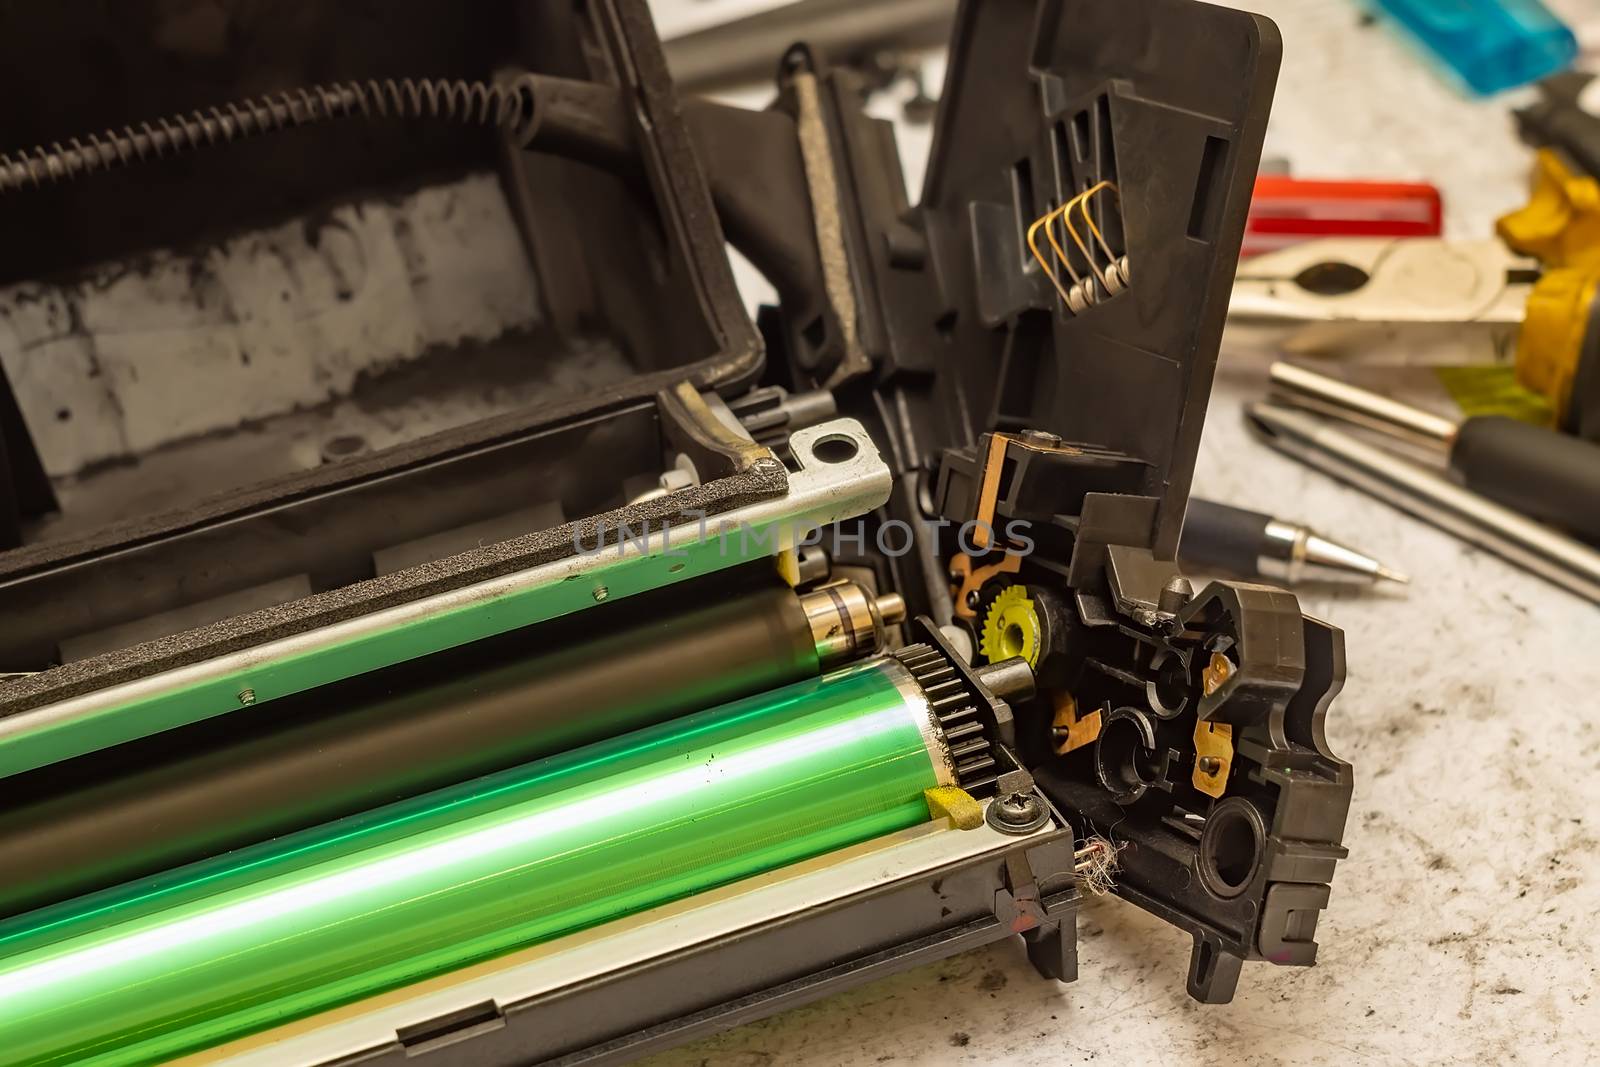 the disassembled cartridge from the laser printer by jk3030